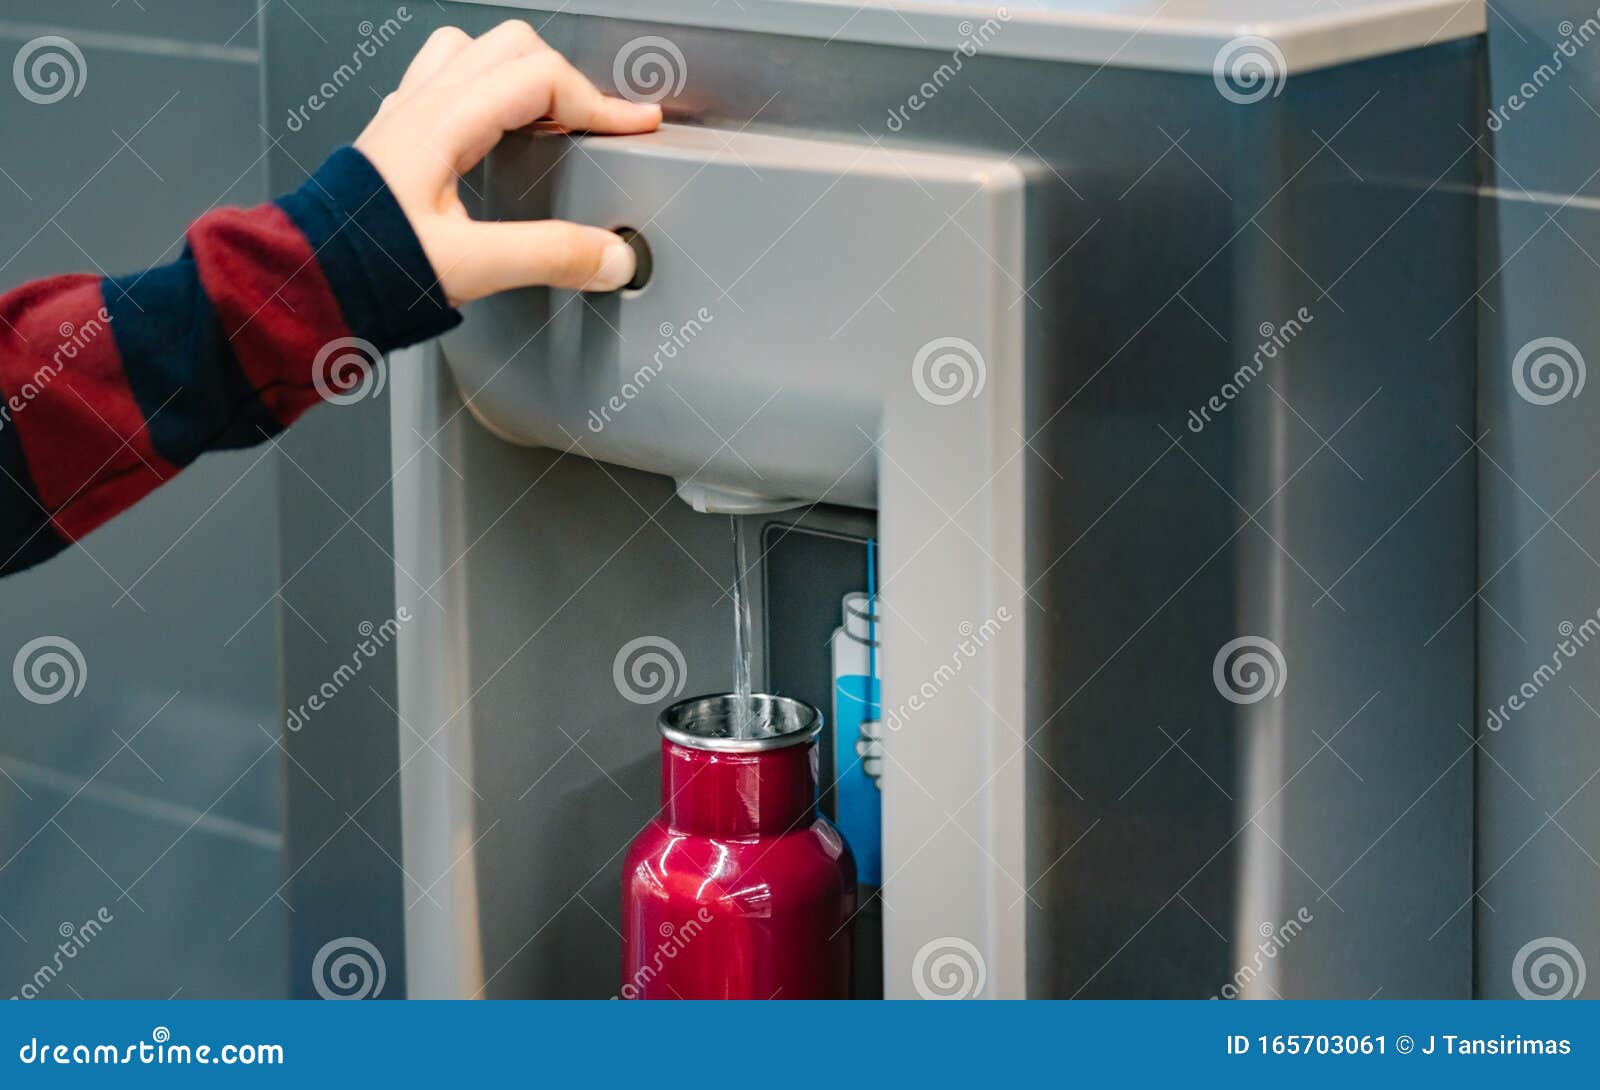 hand of a traveler pressed the button of drinking water filling station at the airport